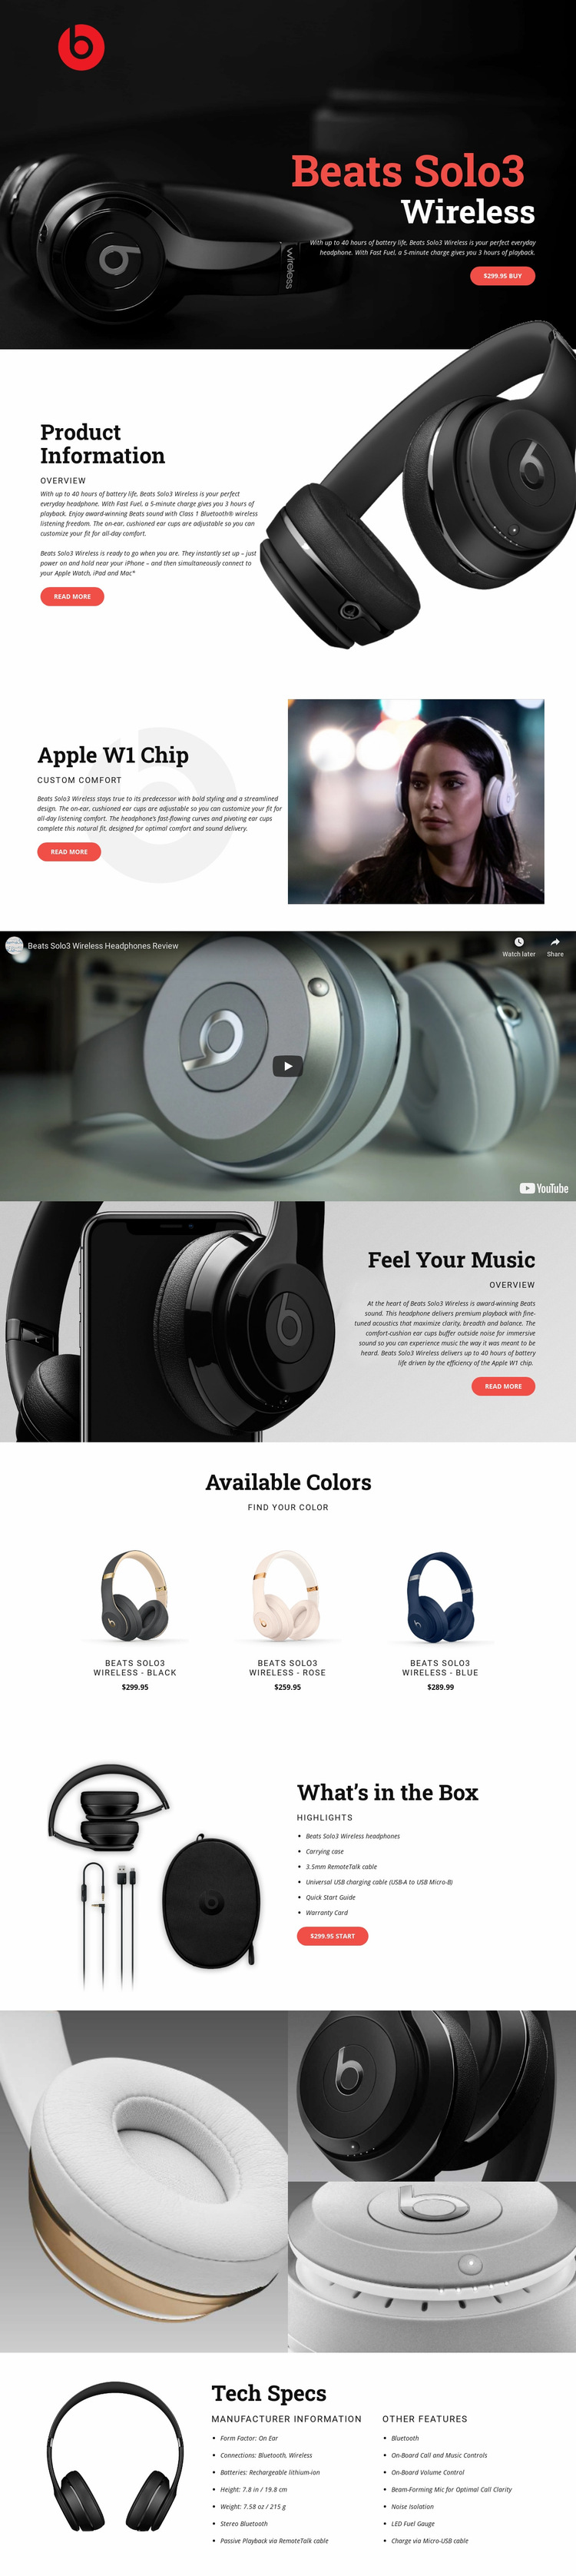 Outstanding quality of music Web Page Design